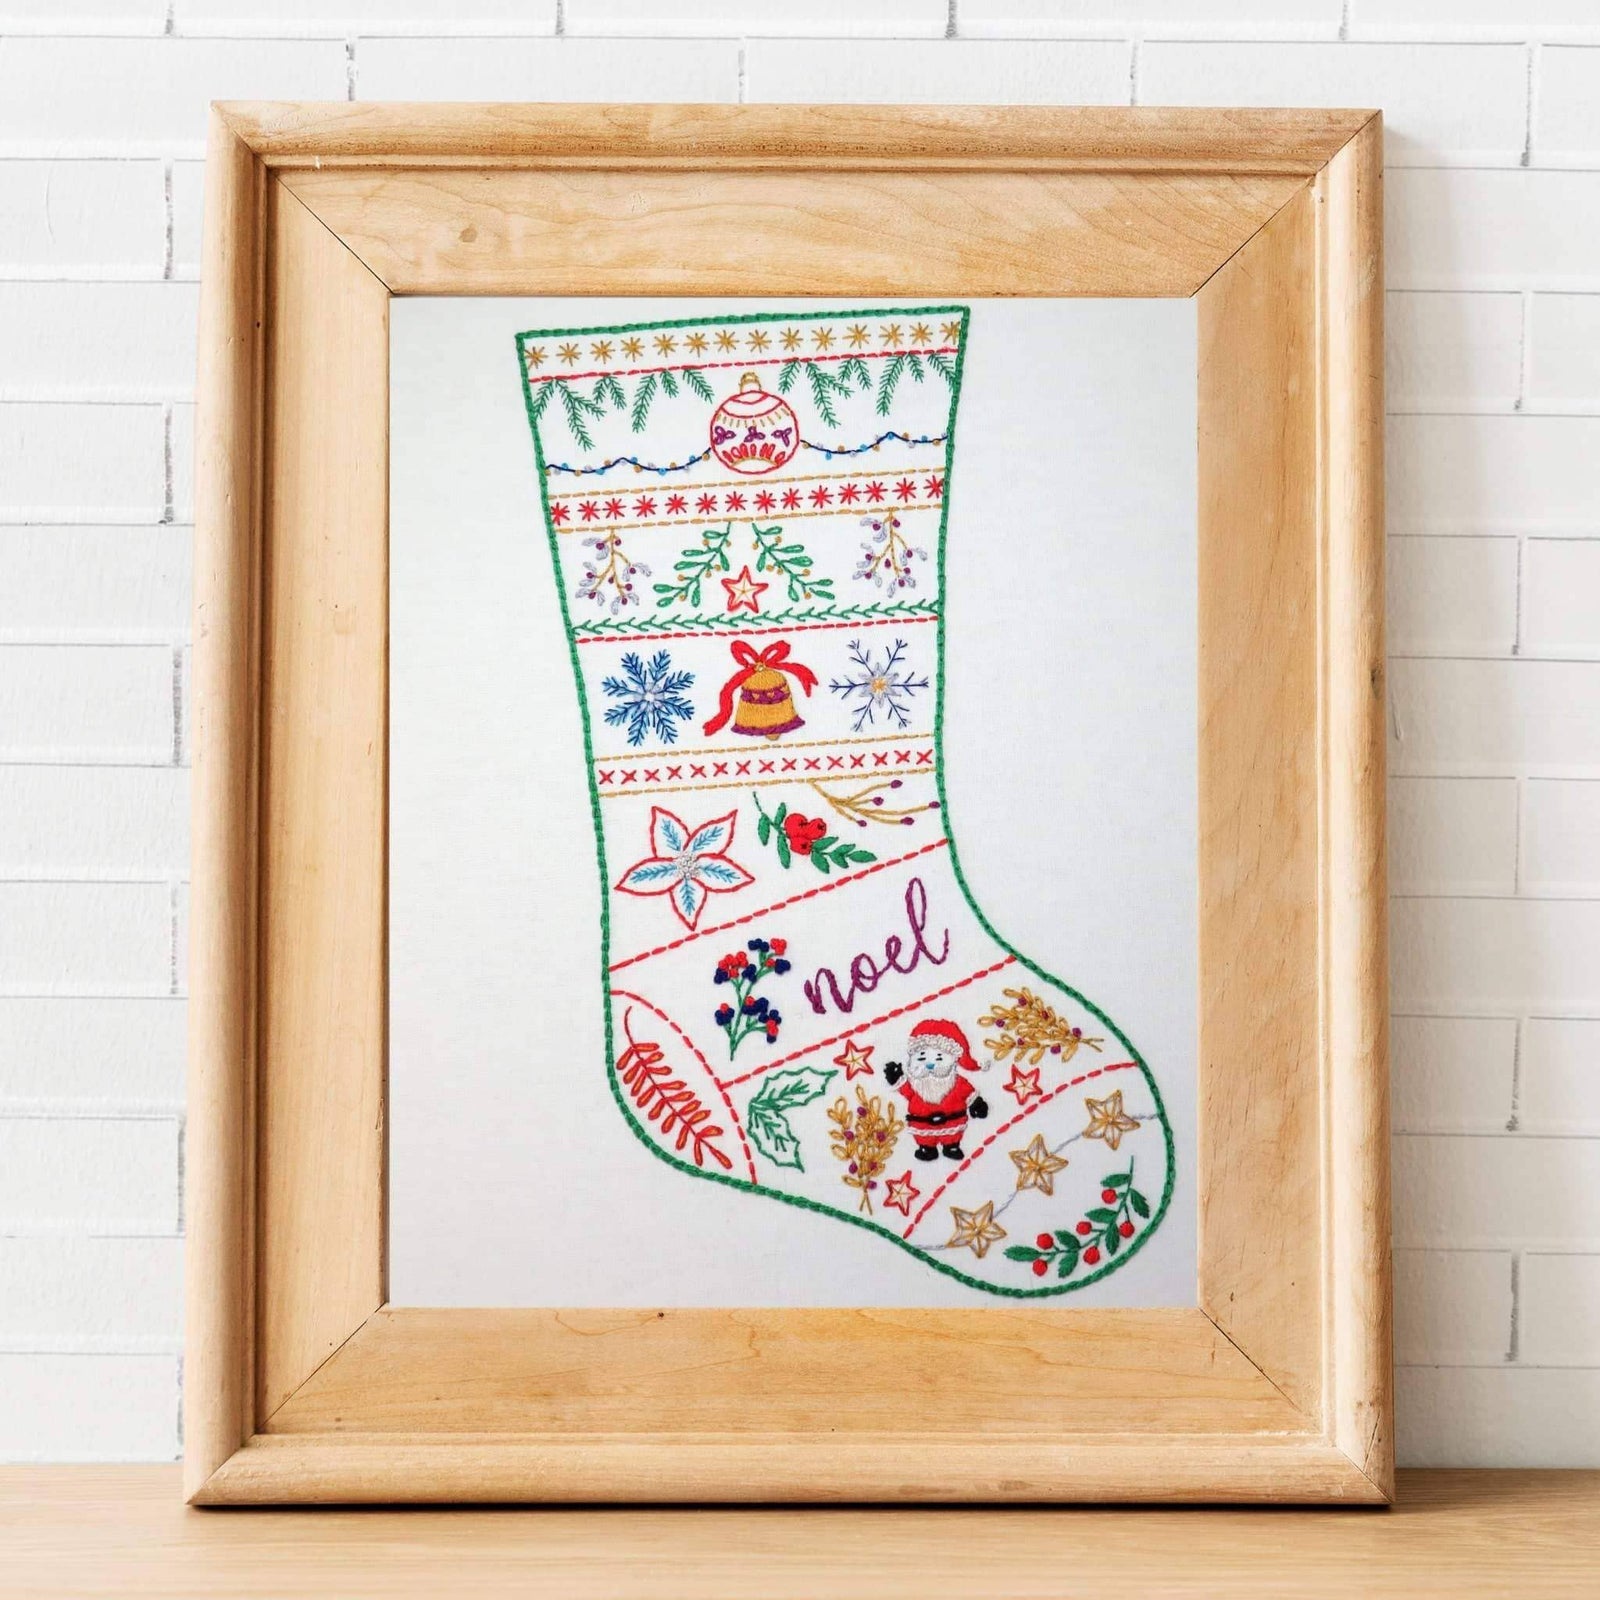 Christmas Stocking Hand Embroidery Kit , Hand Embroidery Kit , StitchDoodles , christmas, embroidery hoop kit, Embroidery Kit, embroidery kit for adults, embroidery kit fro beginners, embroidery kits for adults, embroidery kits for beginners, hand embroidery fabric, modern embroidery kits , StitchDoodles , shop.stitchdoodles.com